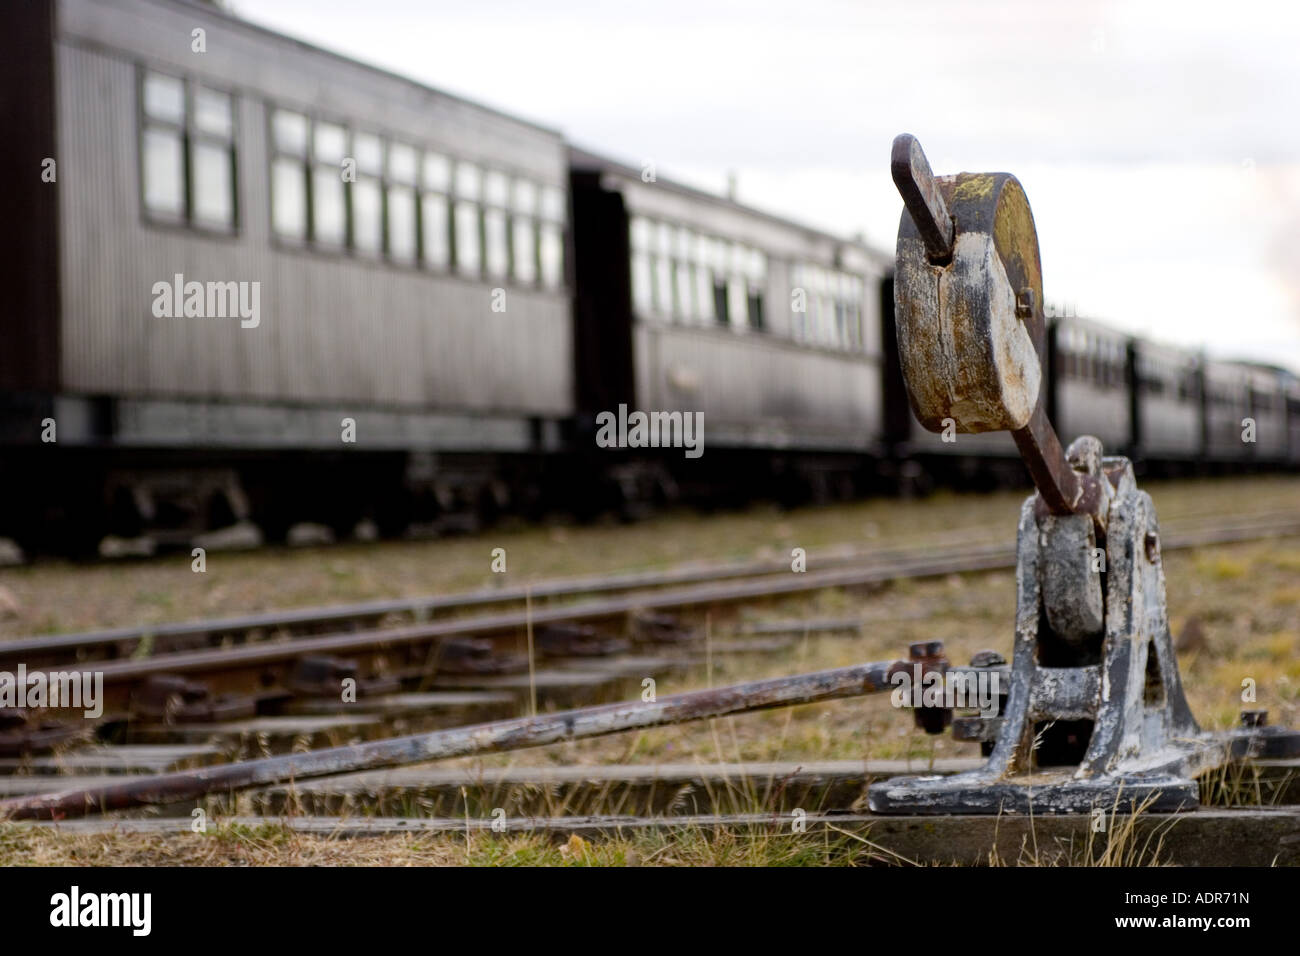 Detail of train rail changer with train in the background. Stock Photo